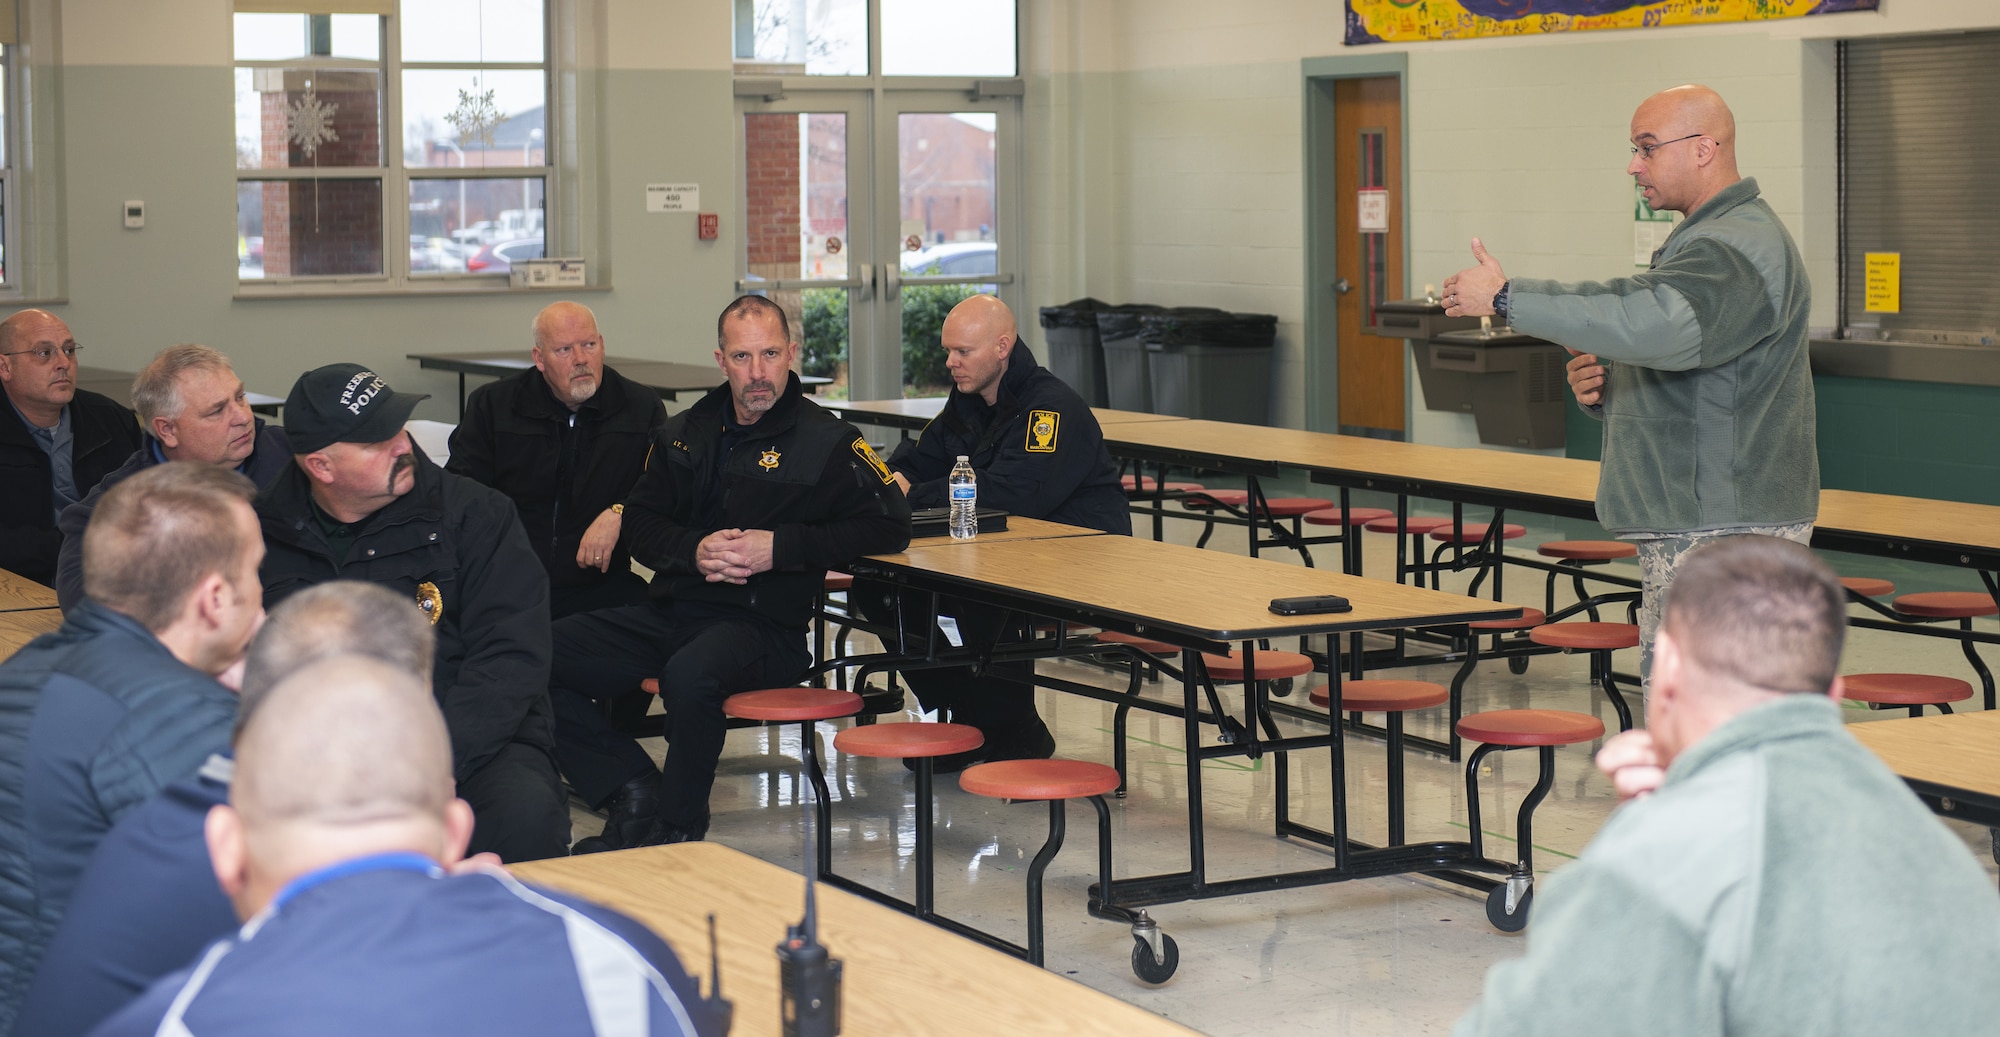 Lt. Col. Yon Dugger, 375th Security Forces Squadron commander, speaks to members of the St. Clair County Police Department and Scott Elementary School, Dec. 21, 2018, at Scott Air Force Base, Illinois. The organizations met to discuss base procedures in the event of an active shooter incident to include a walkthrough of the school to locate all possible exit points and potential safe rooms in the building.